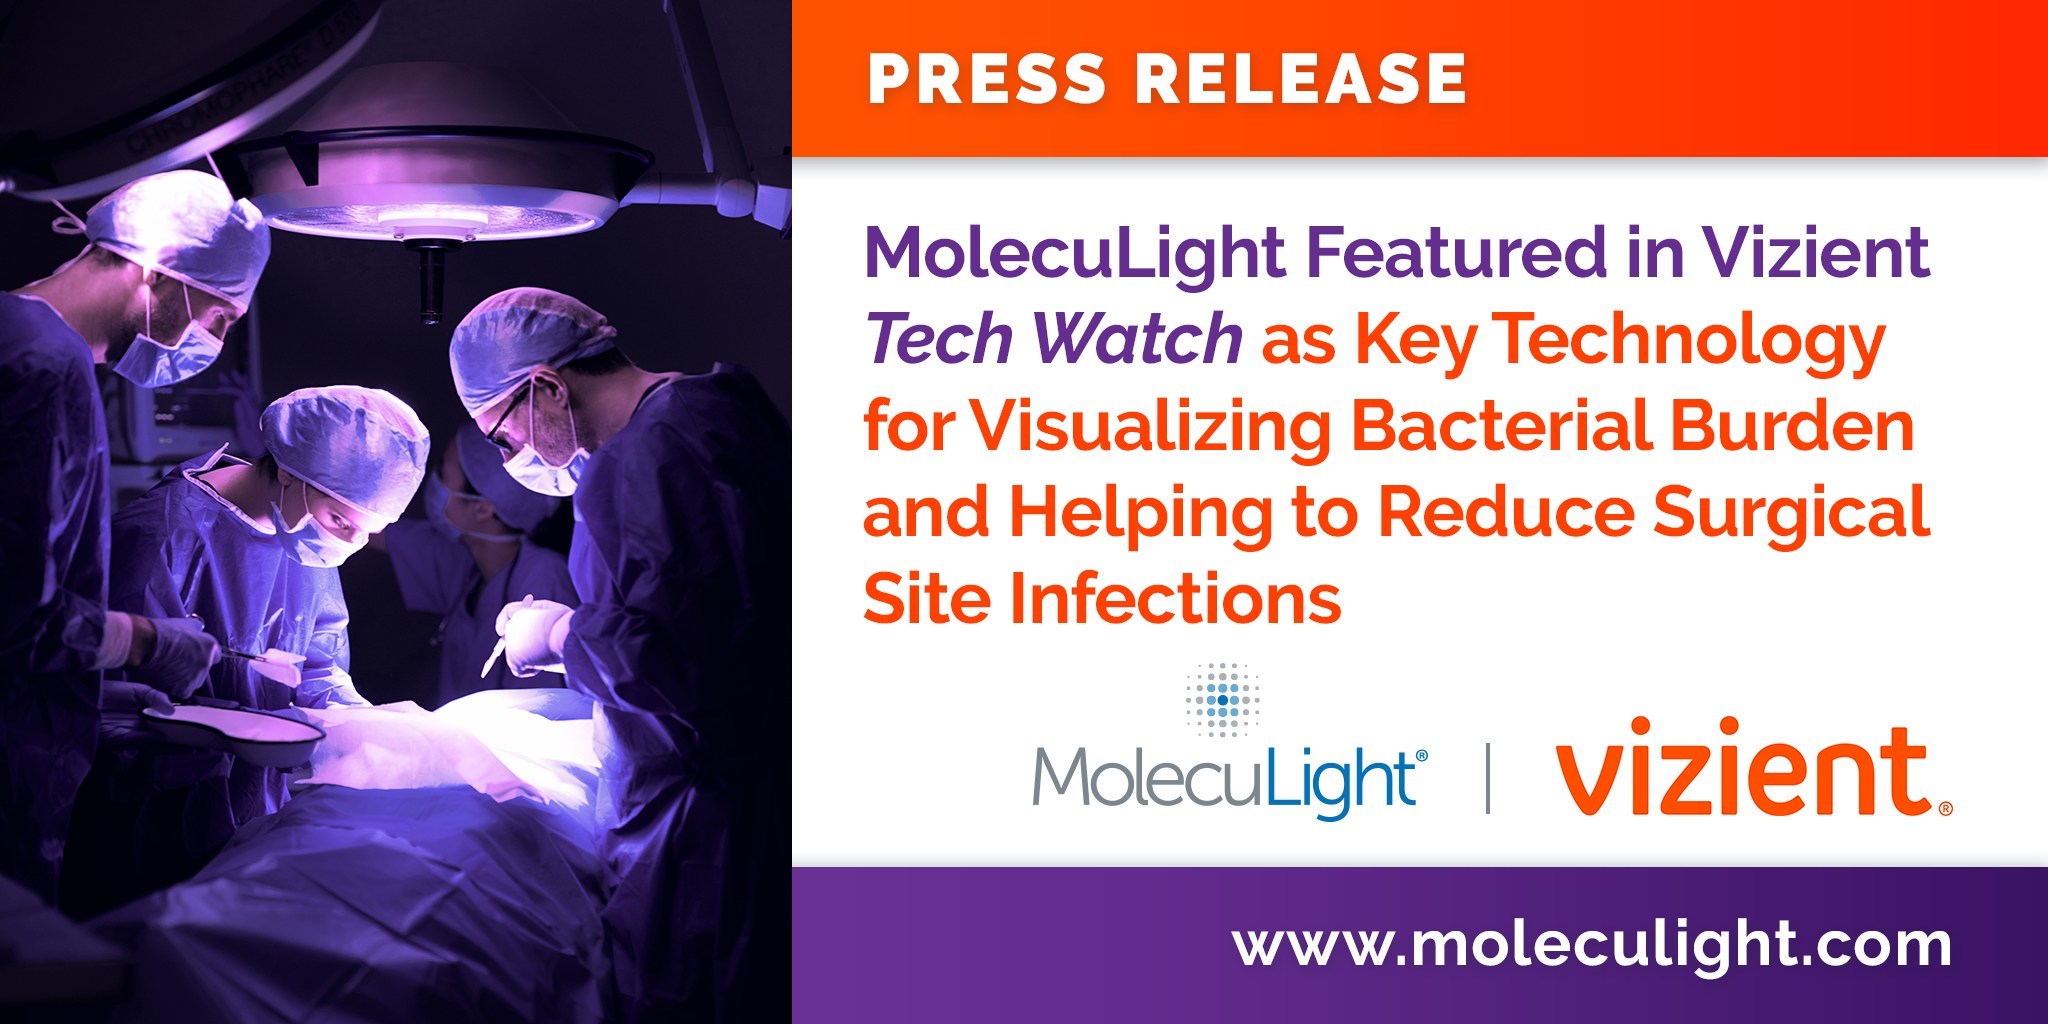 MolecuLight Featured in Vizient Tech Watch as Key Technology for Visualizing Bacterial Burden and Helping to Reduce Surgical Site Infections